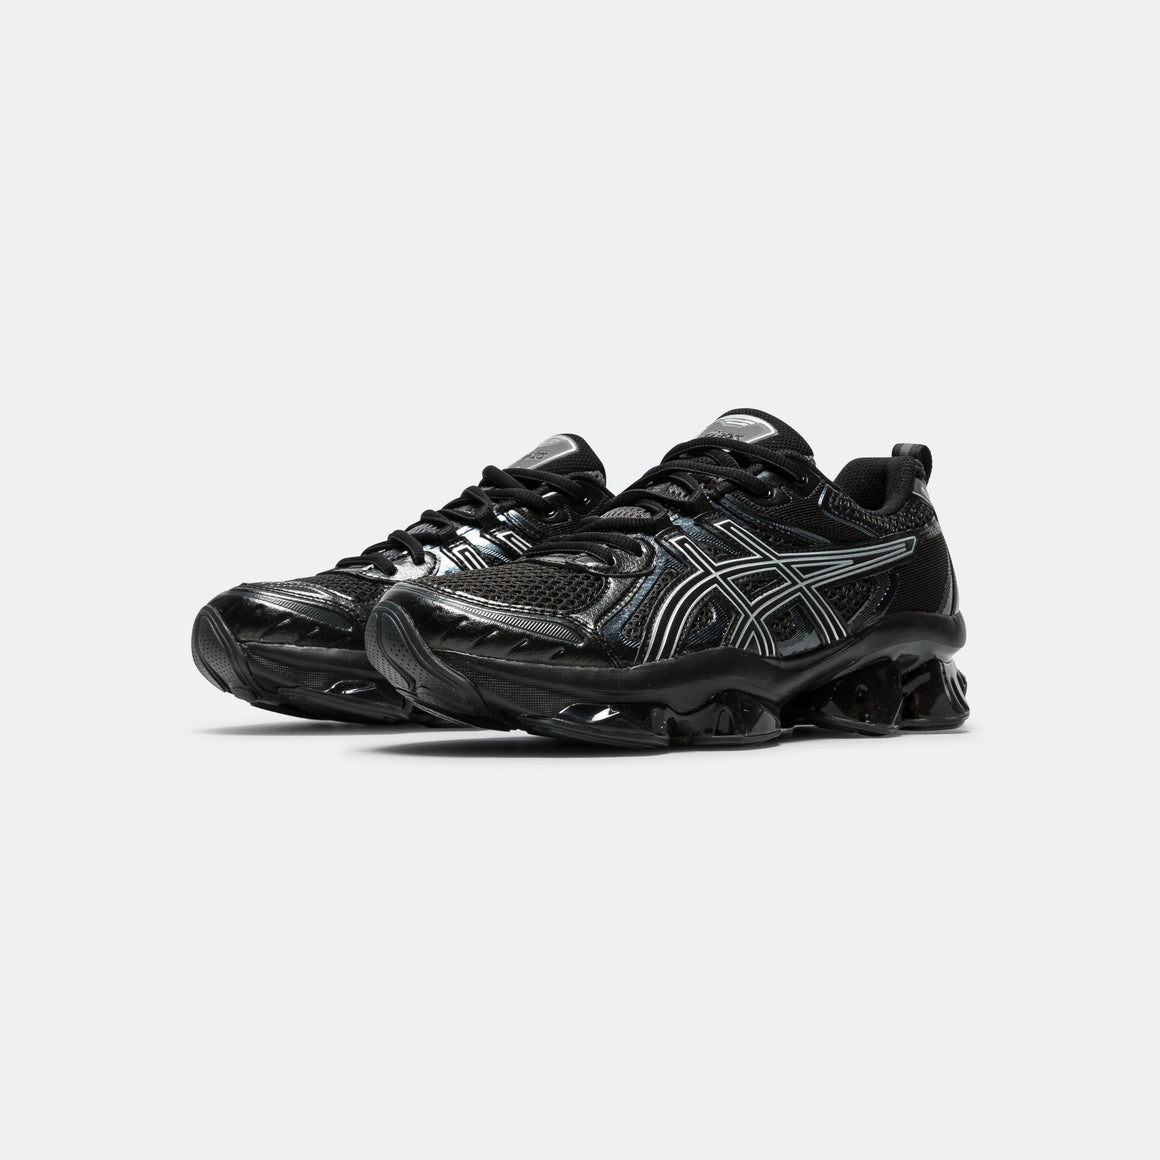 Asics - GEL-Quantum Kinetic - Graphite Grey/Black - UP THERE